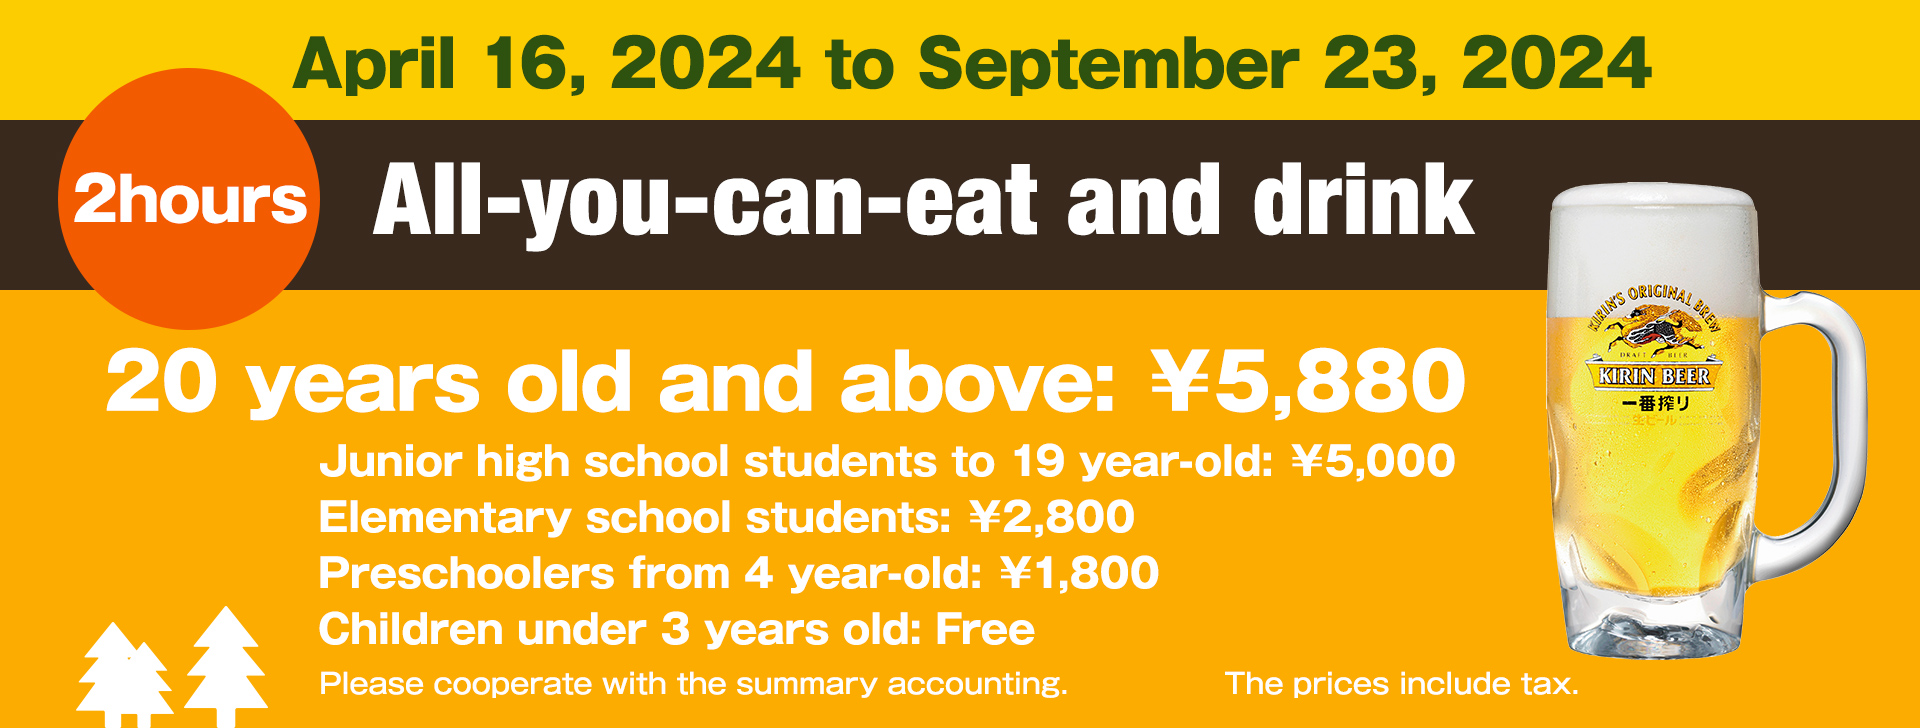 April 16, 2024 to September 23, 2024 All-you-can-eat and drink for 2 hours Price 20 years old and above: 5880 yen Junior high school students to 19 year-old: 5000 yen Elementary school students: 2800 yen Preschoolers from 4 year-old: 1800 yen Children under 3 years old: Free The prices include tax.